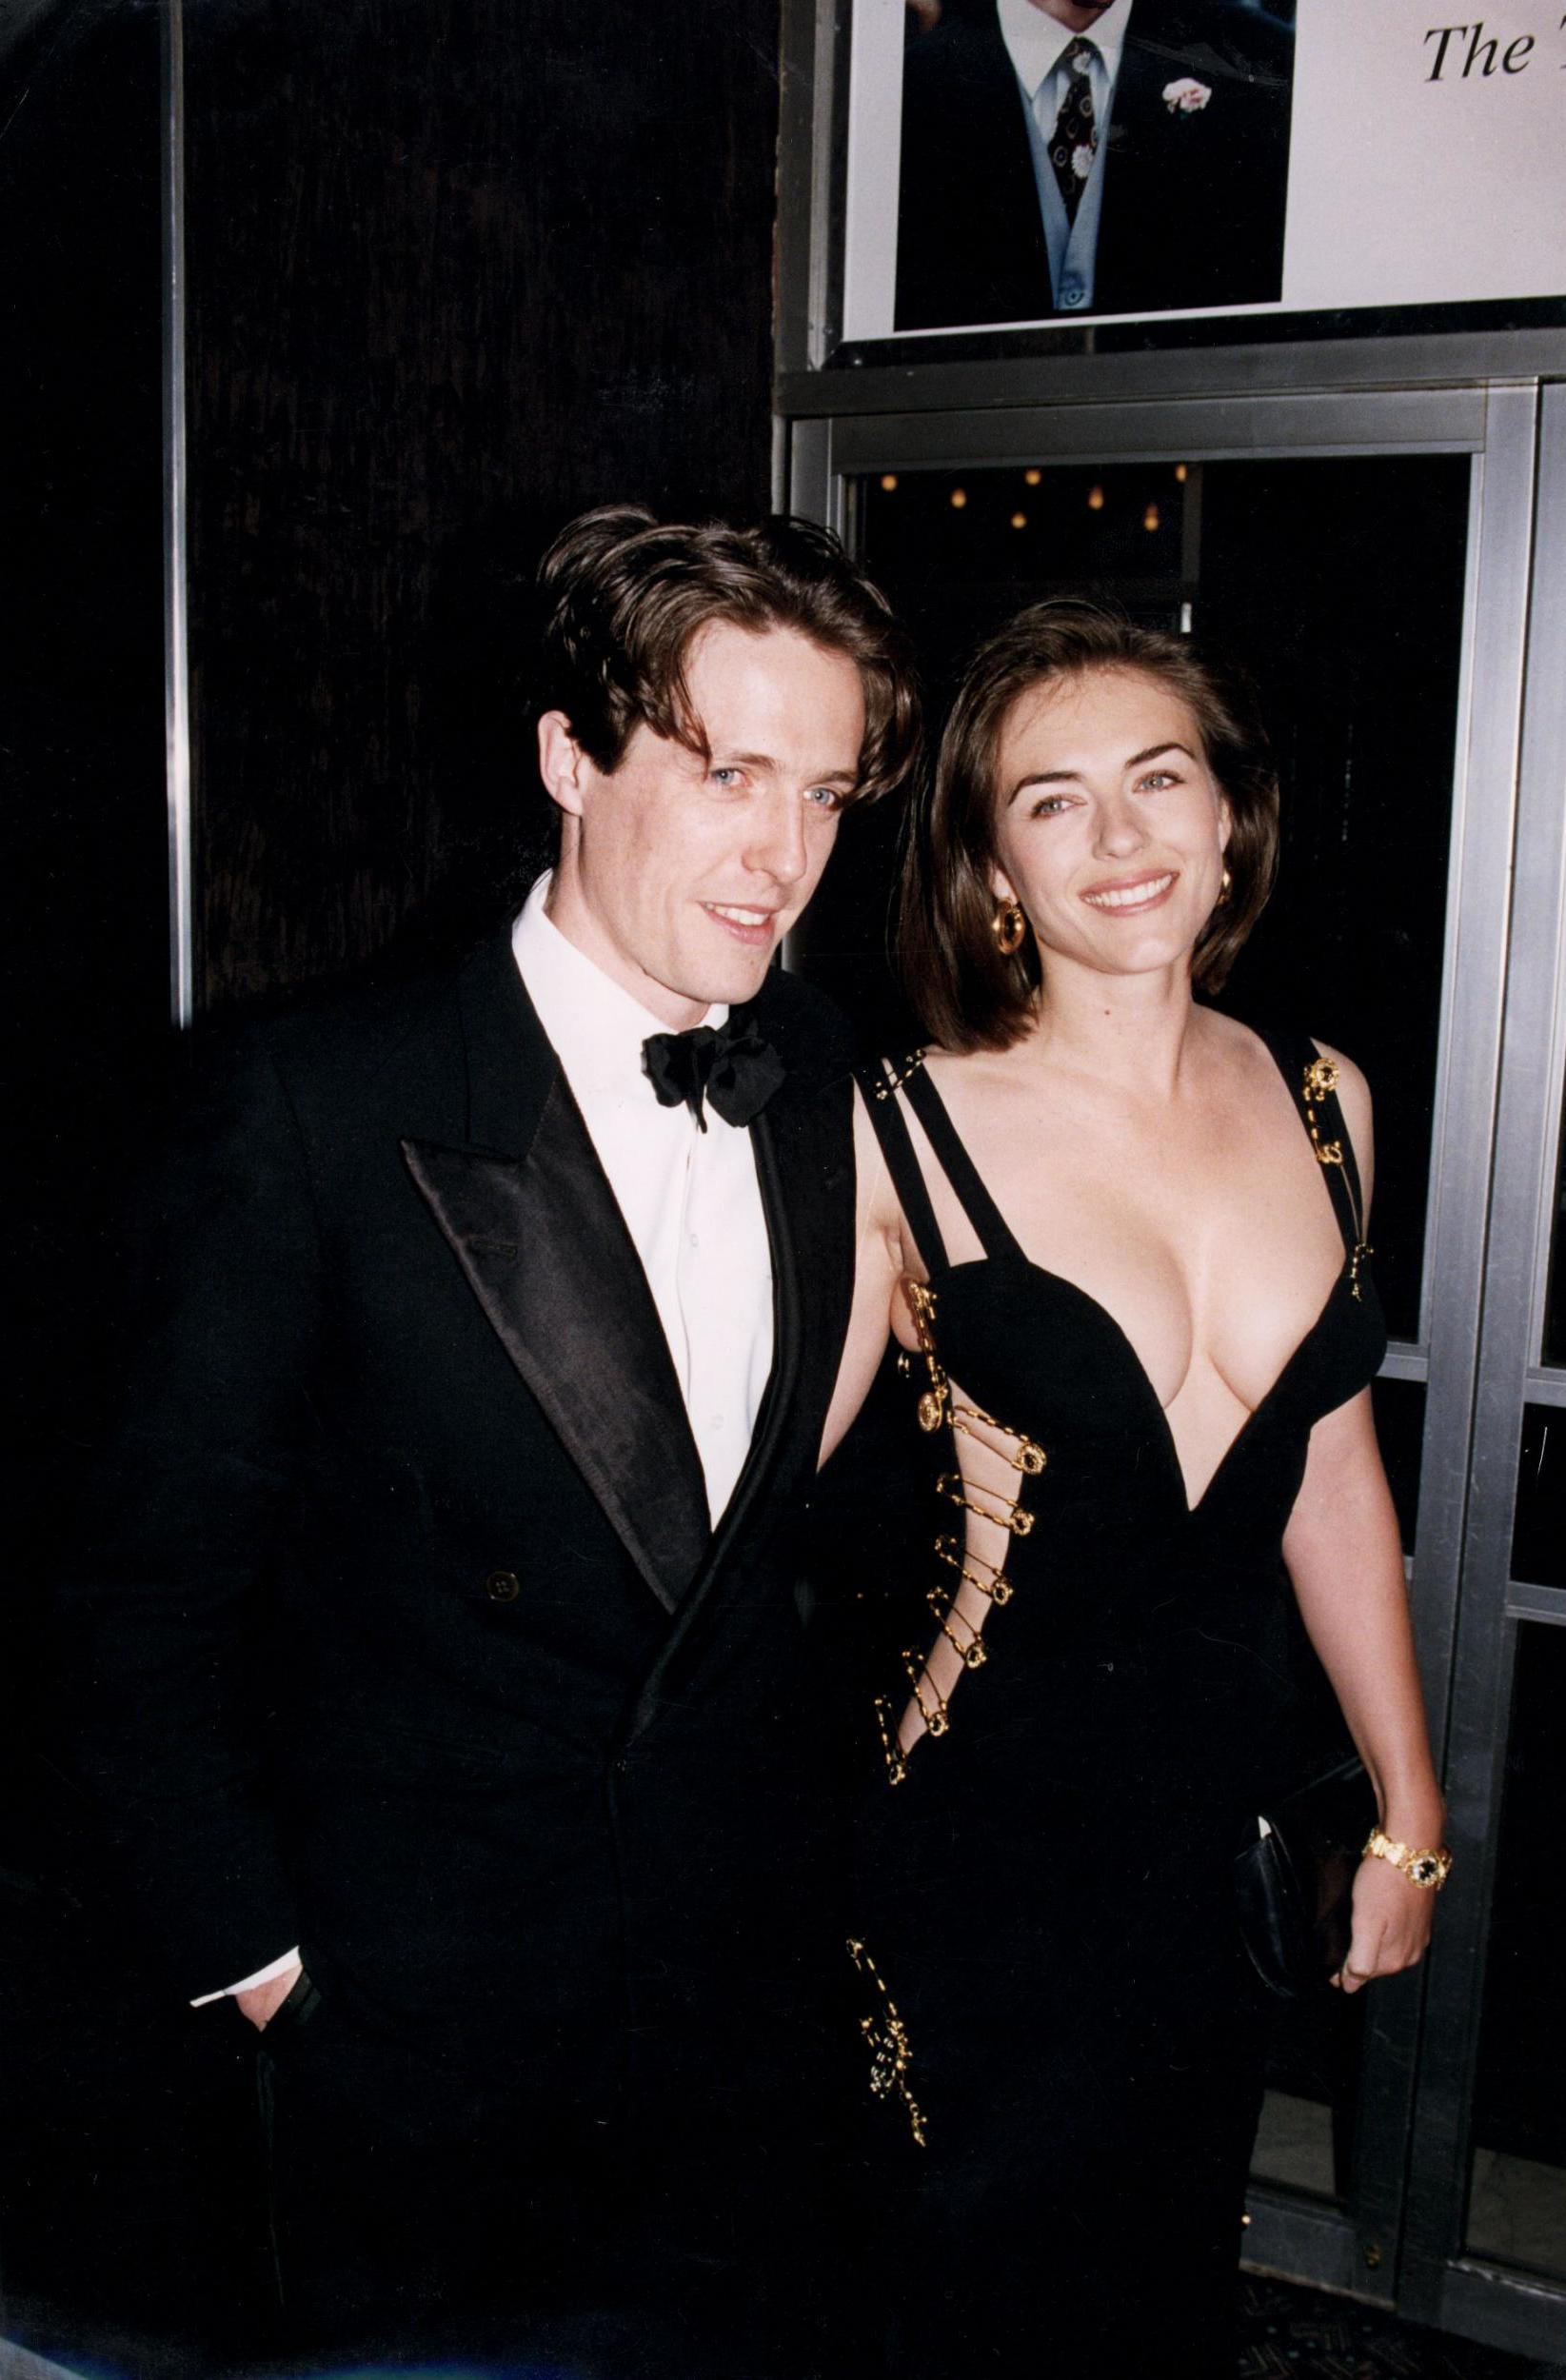 Elizabeth Hurley with then-boyfriend Hugh Grant at the premiere of Four Weddings and a Funeral in 1994